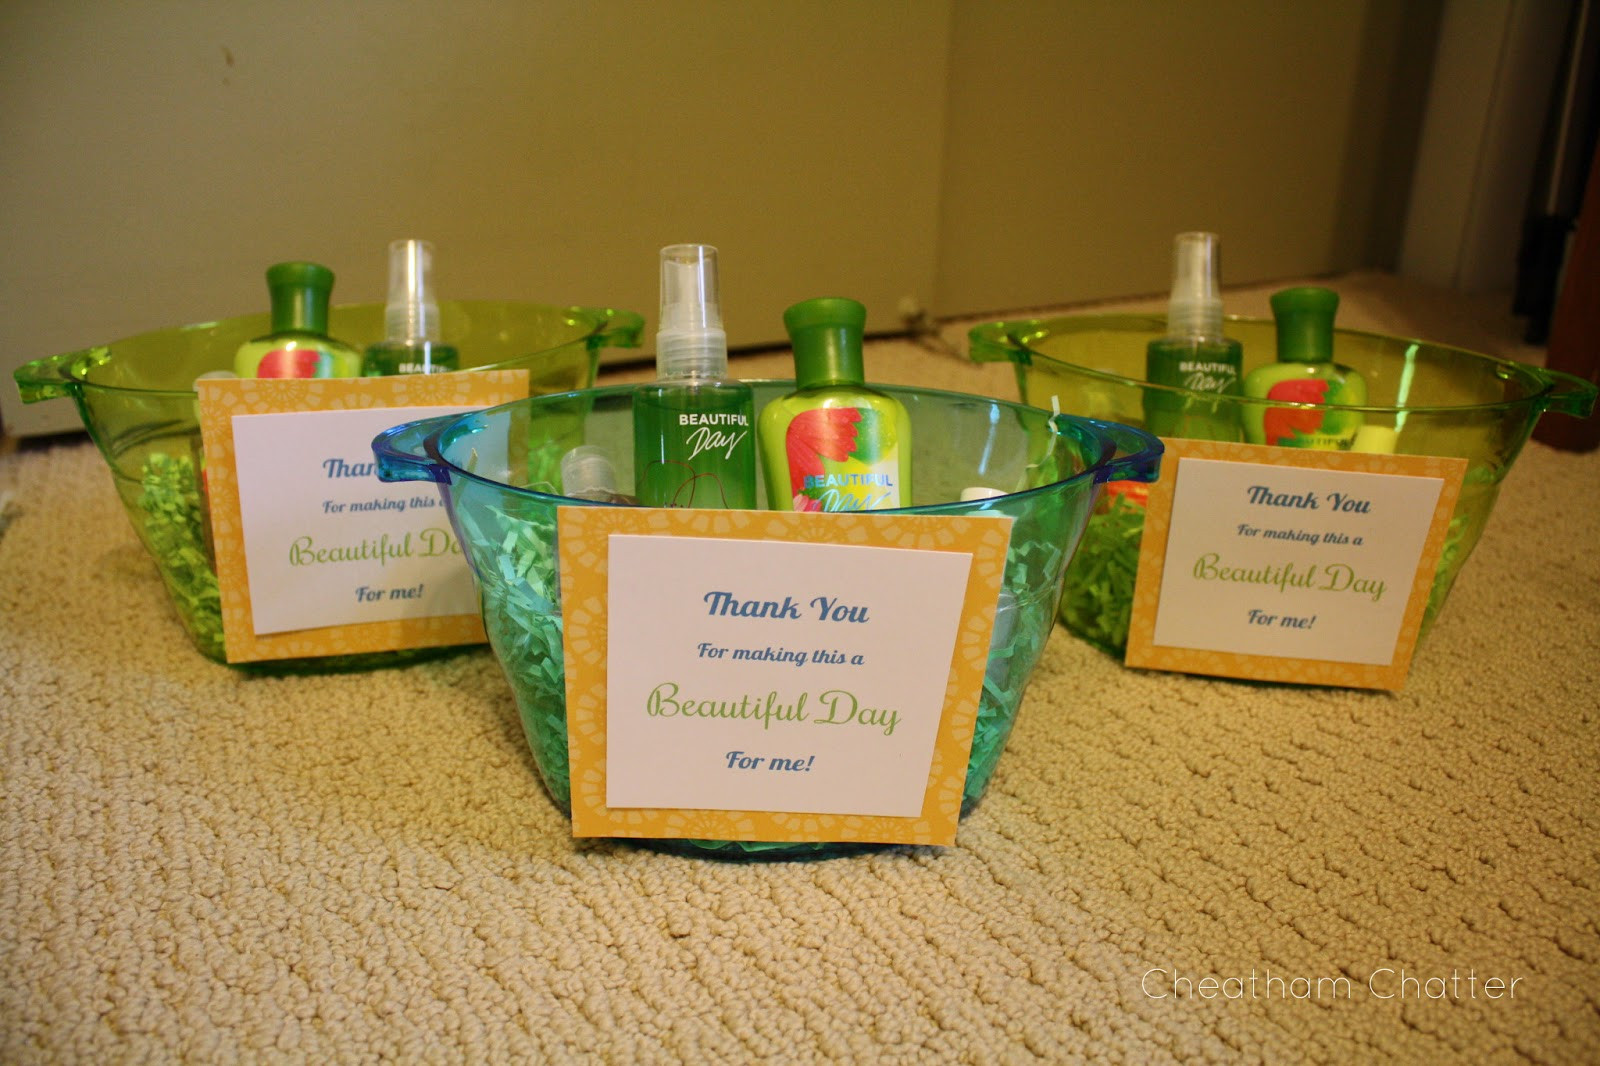 Thank You Gift Ideas For Baby Shower Host
 Cheatham Chatter Baby Shower Favors & Hostess Gifts